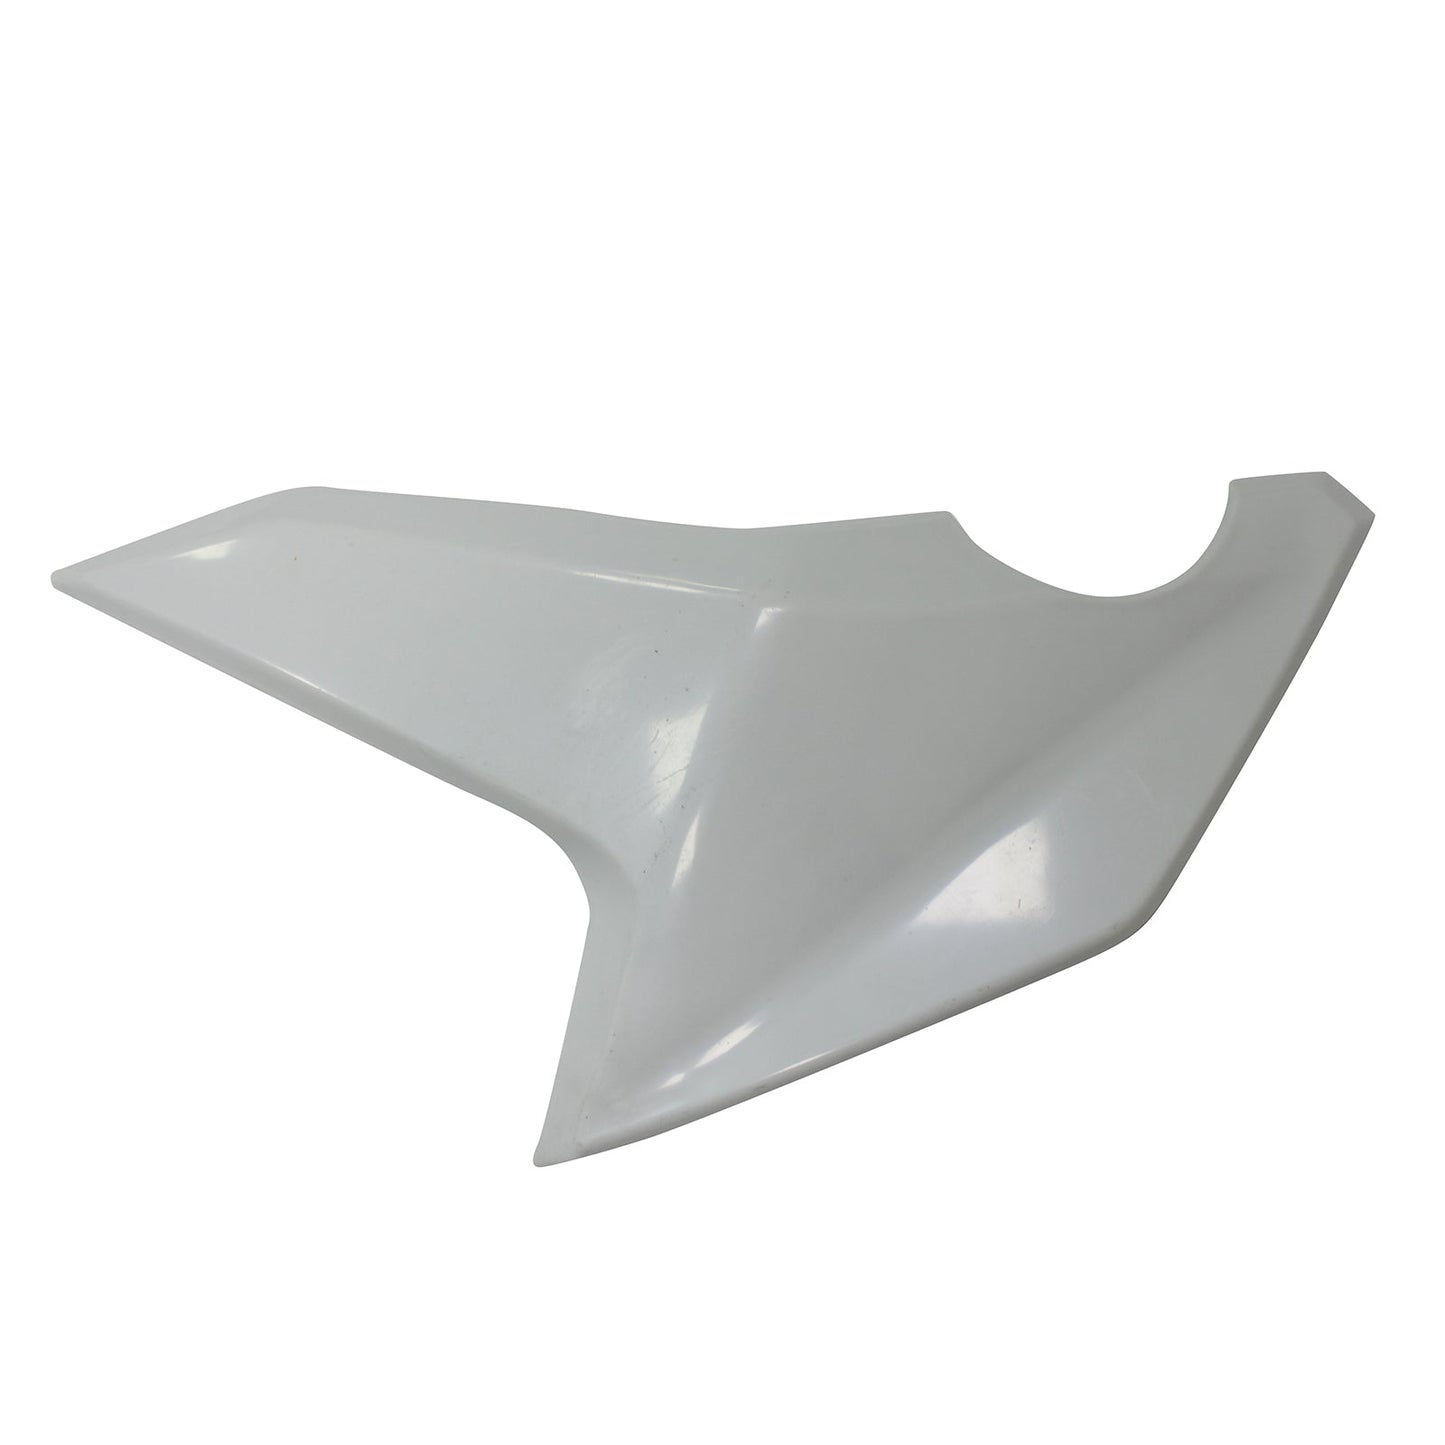 Amotopart BMW F750/850GS 2018-2022 Fairing Injection Molding Unpainted